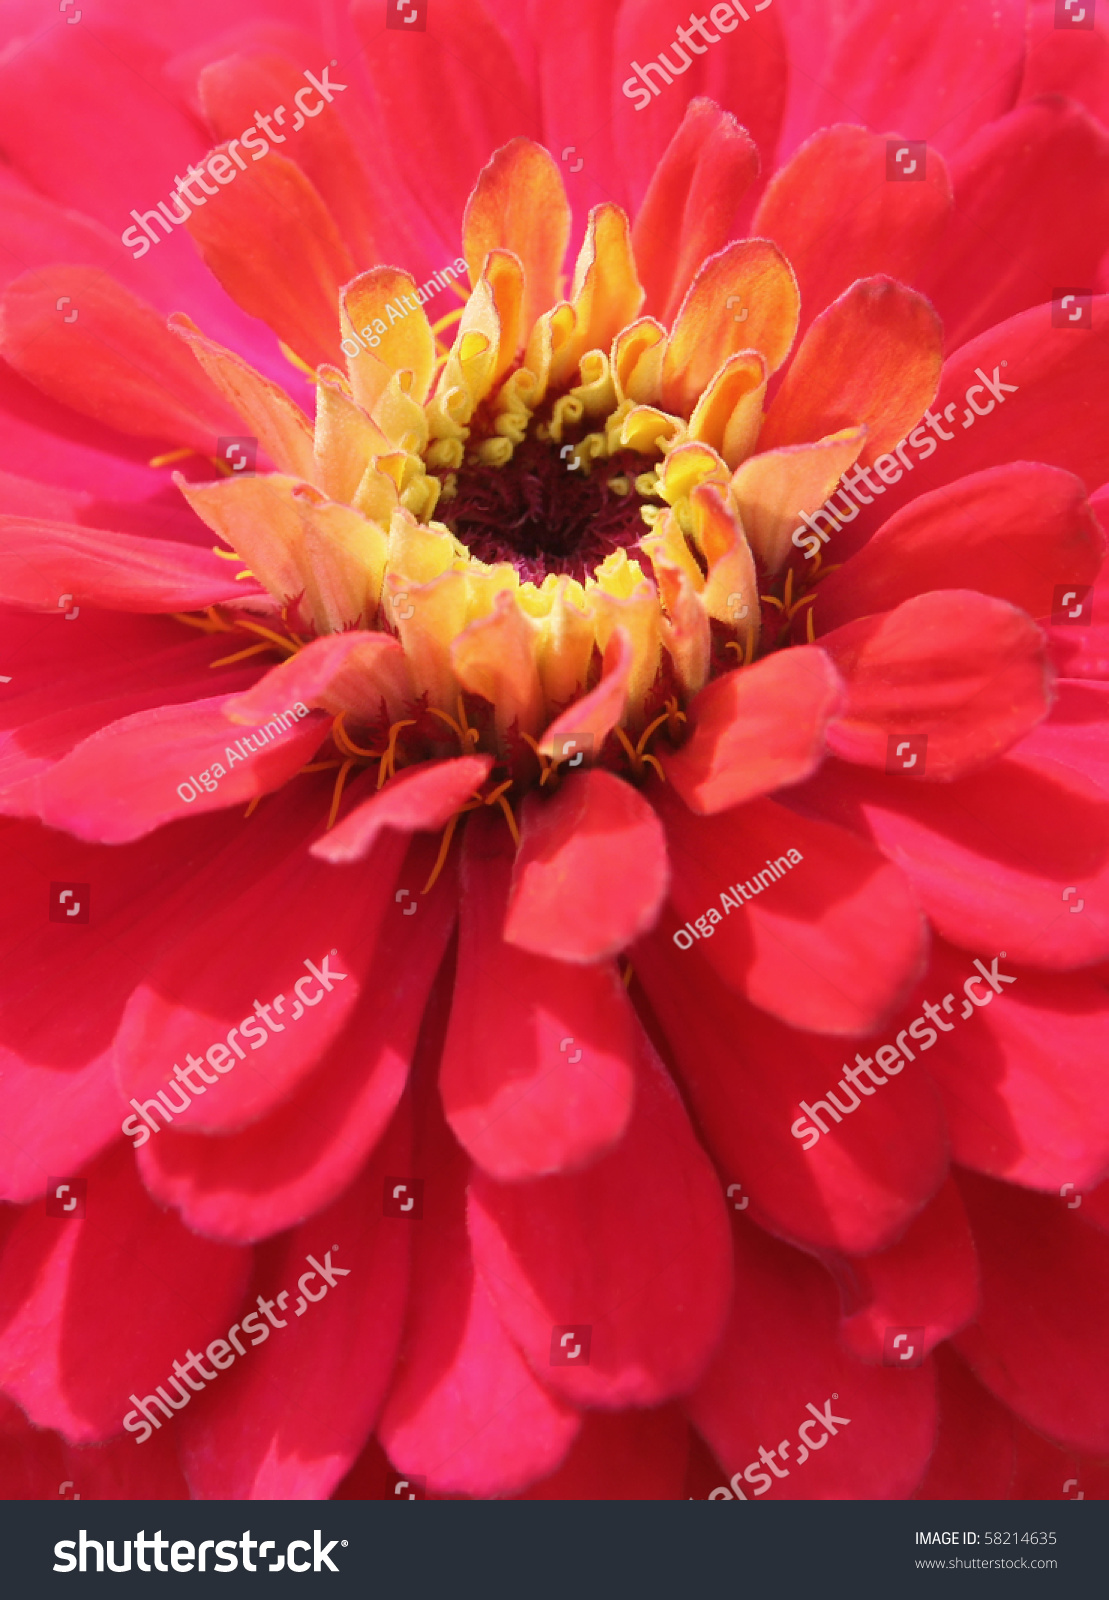 Beautiful bright pink flower with yellow centers closeup #58214635